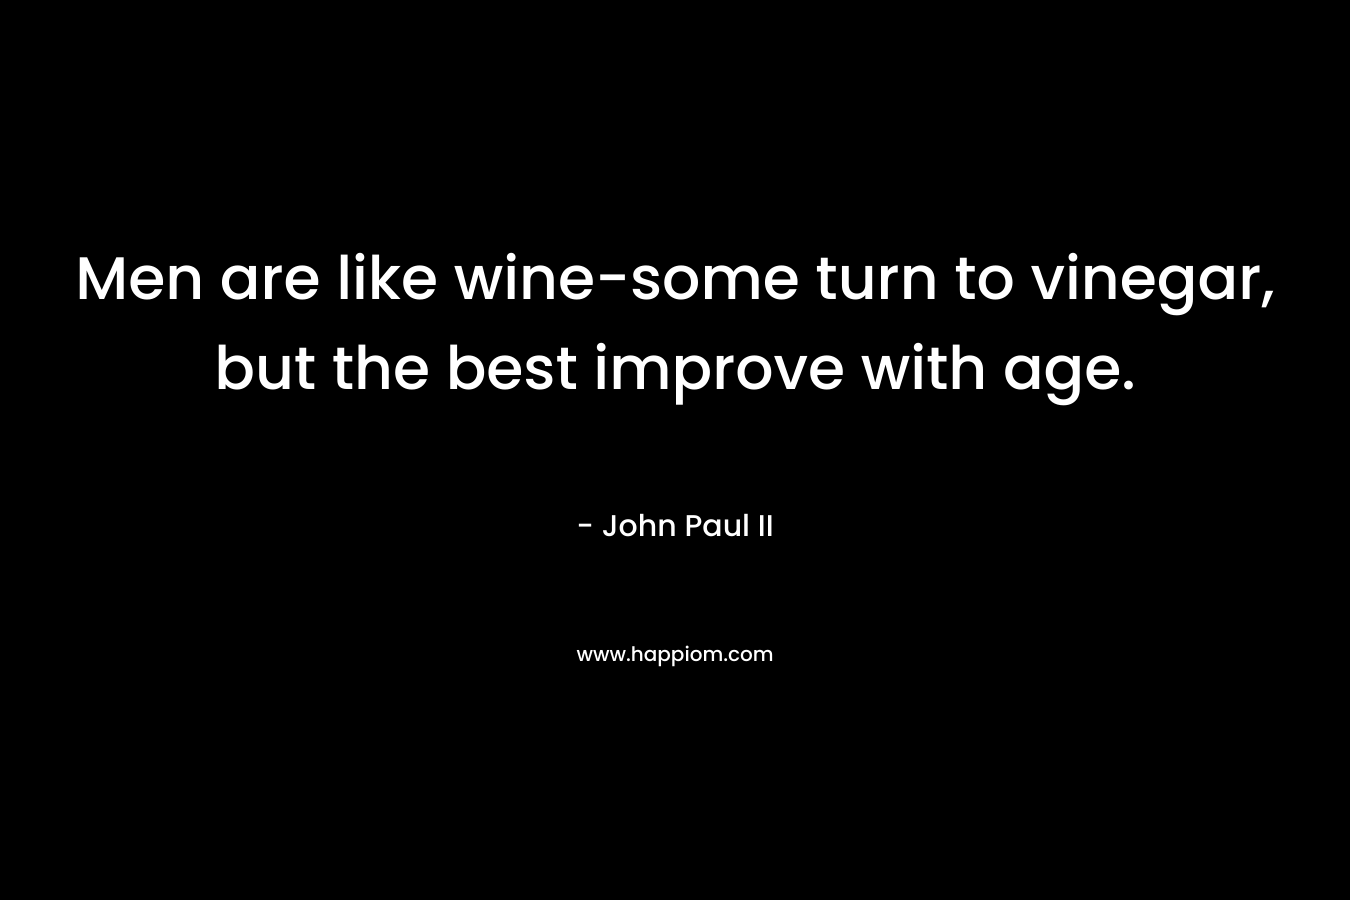 Men are like wine-some turn to vinegar, but the best improve with age. – John Paul II